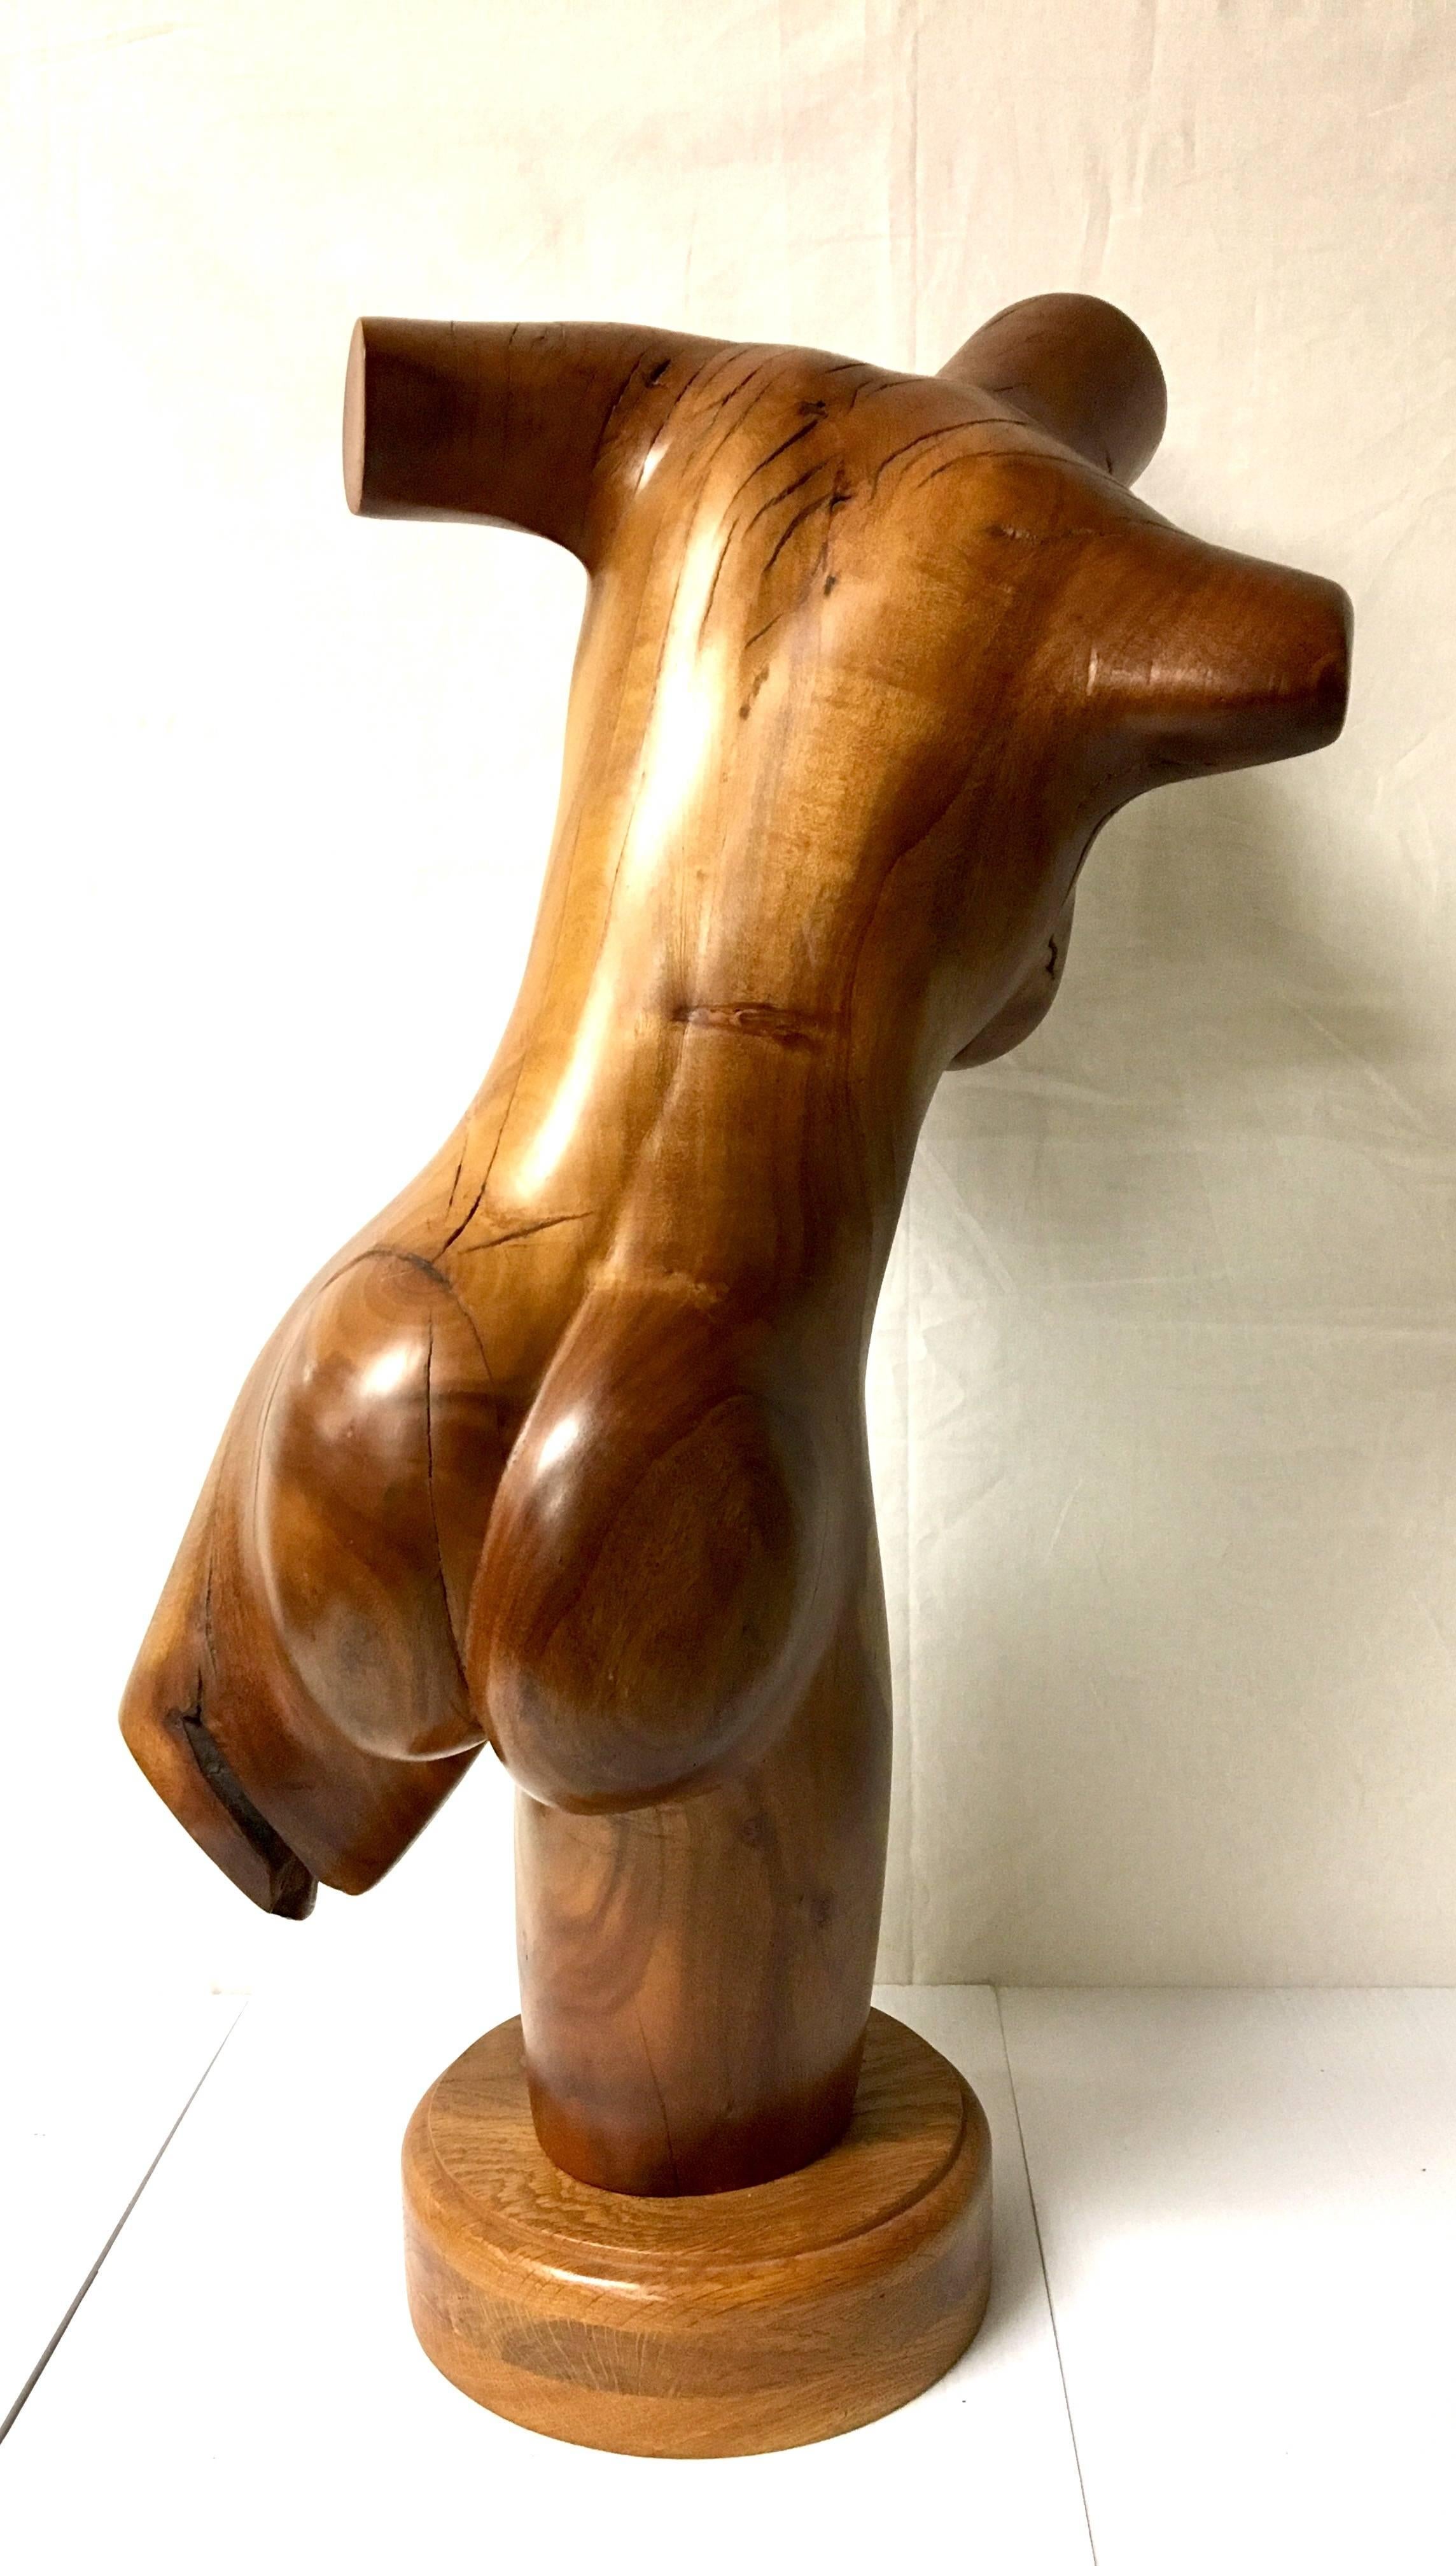 American Tall Nude Female Torso Sculpture Hand-Carved in Wood by California Artist For Sale